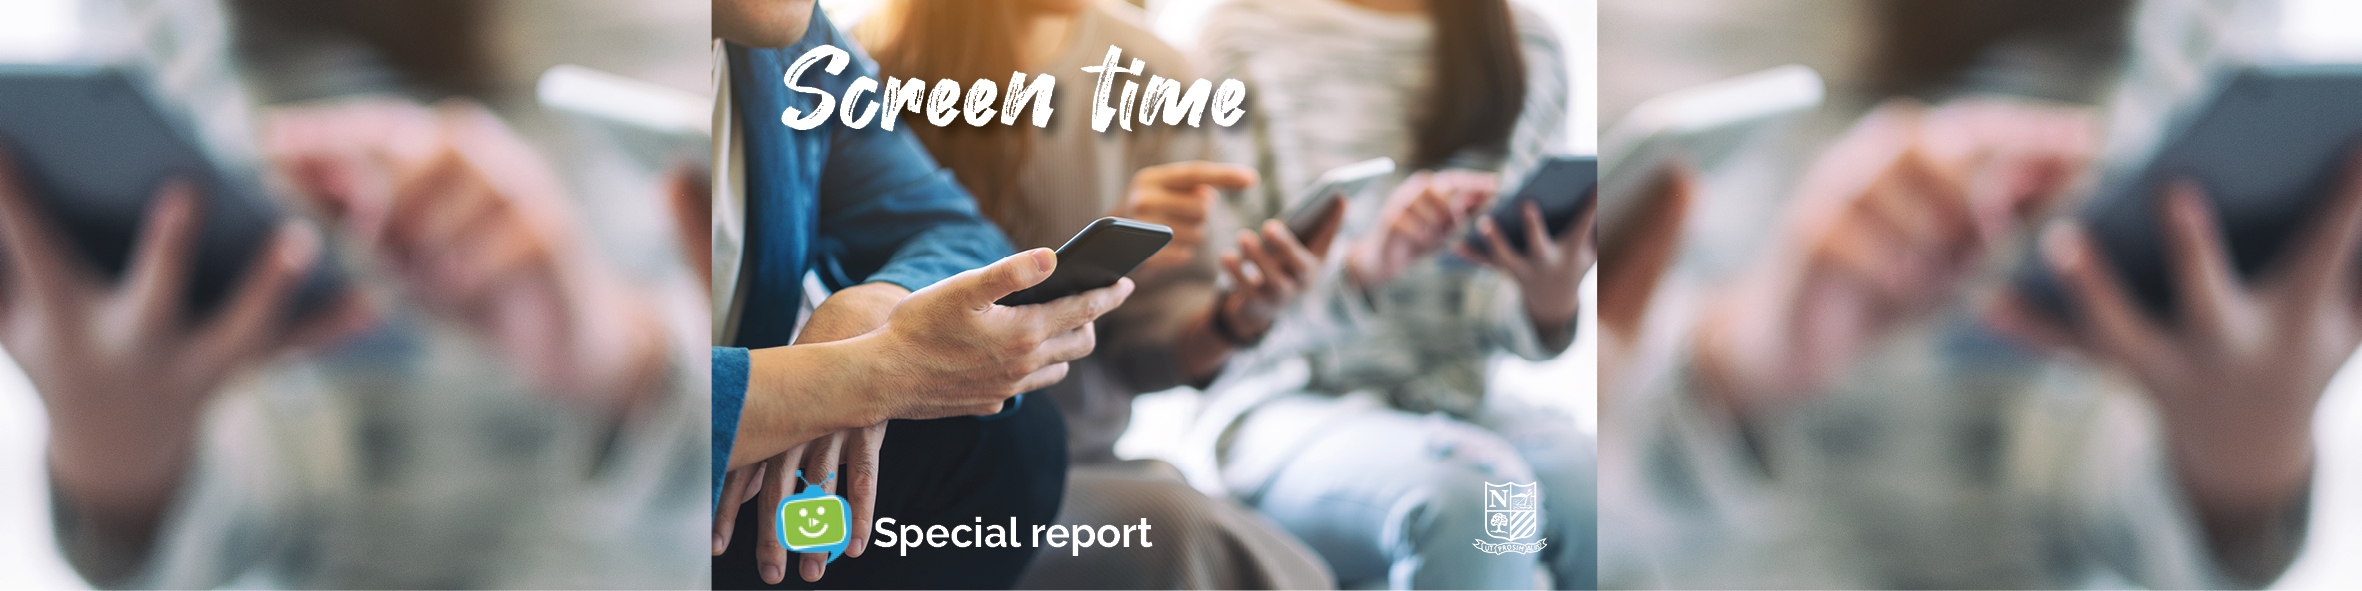 wellbeing portal - screen time 